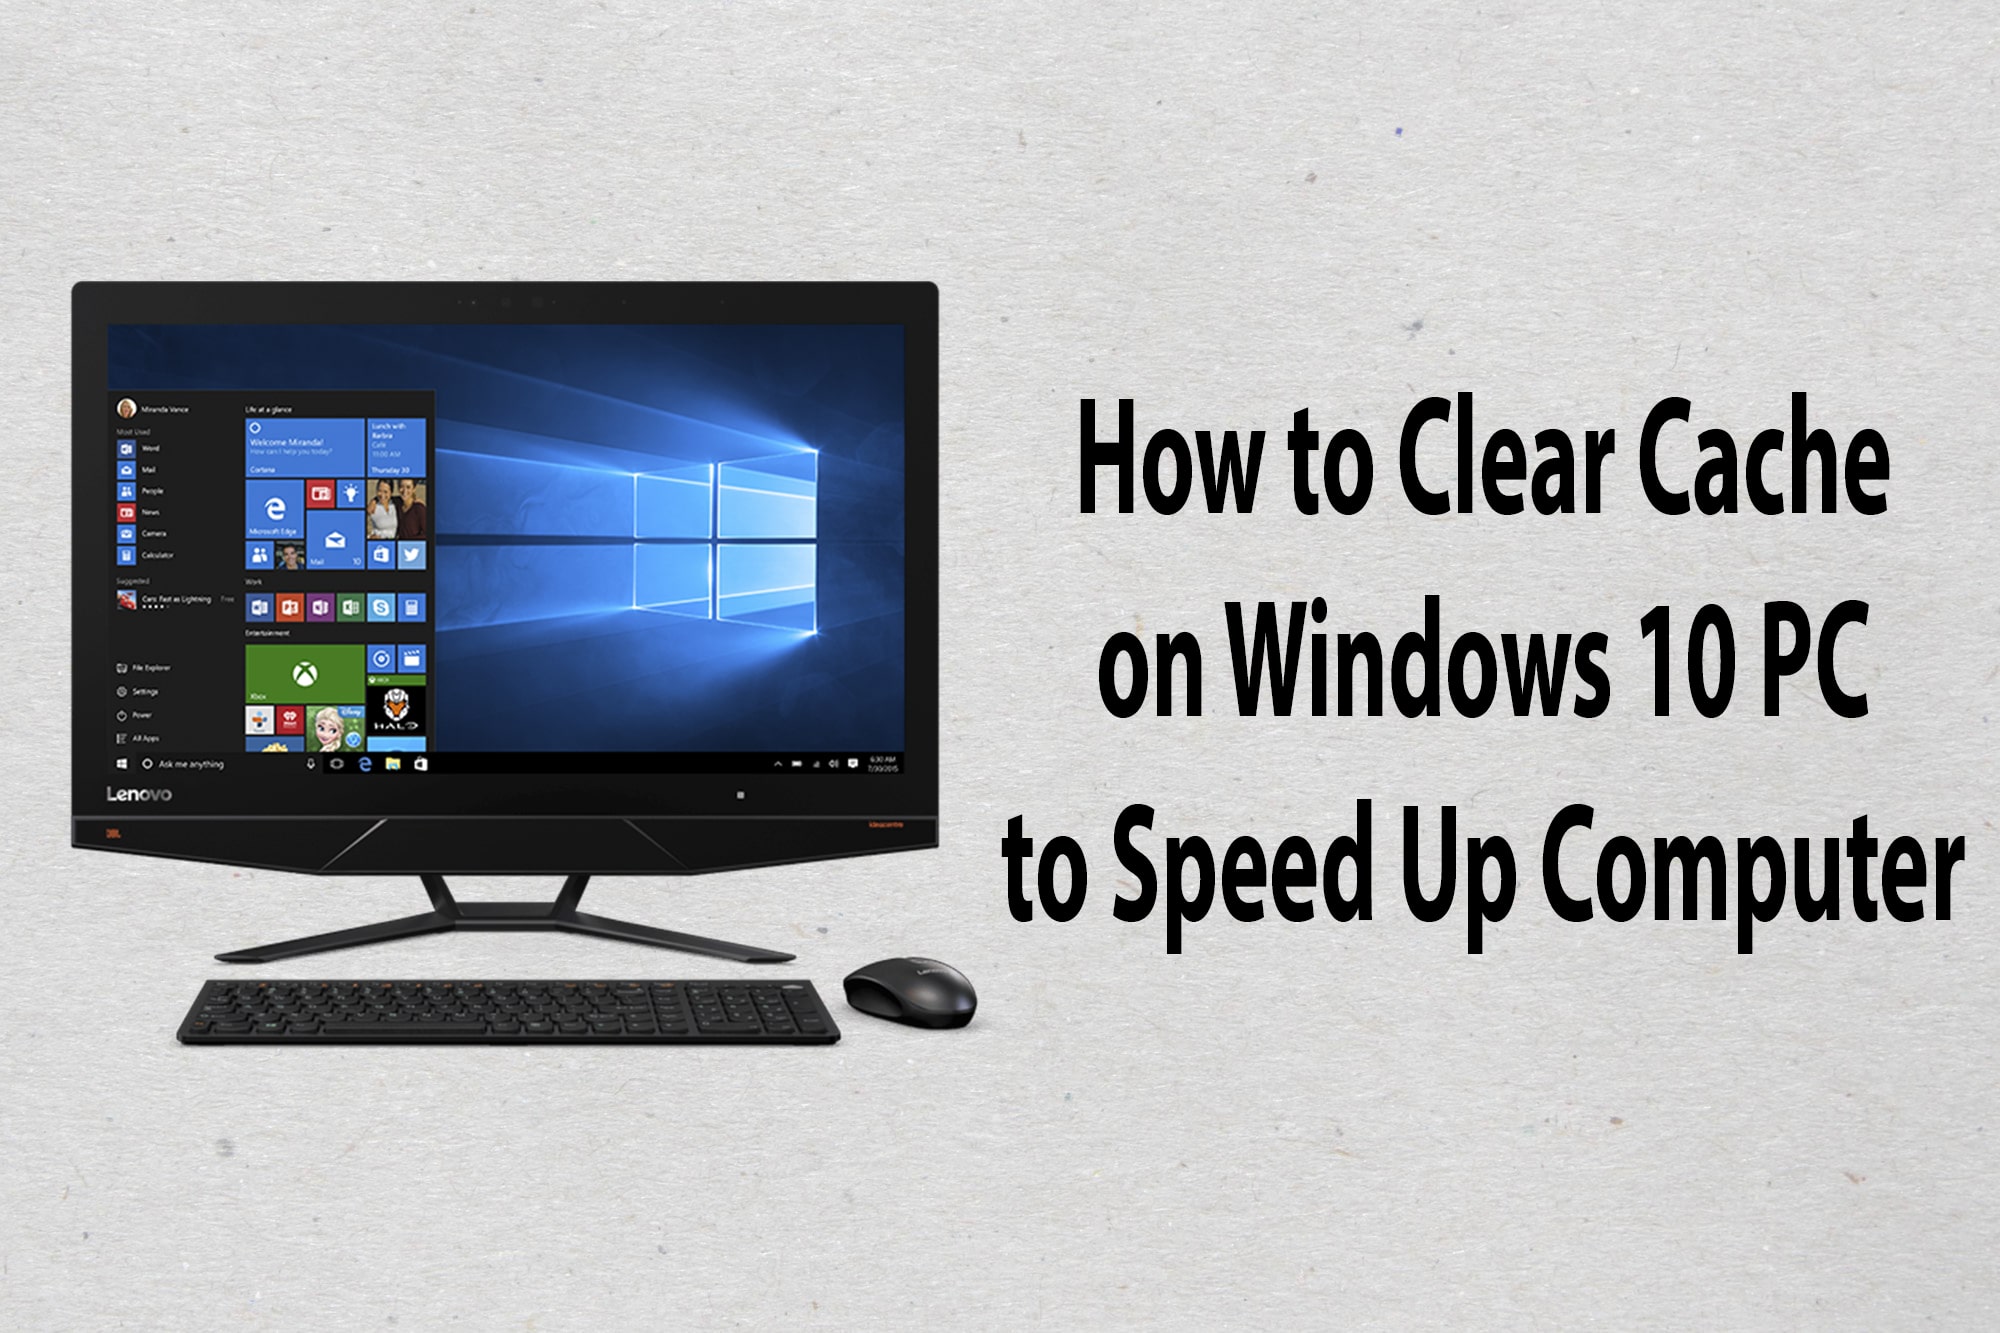 How to Clear Cache on Windows 10 to Speed Up Computer